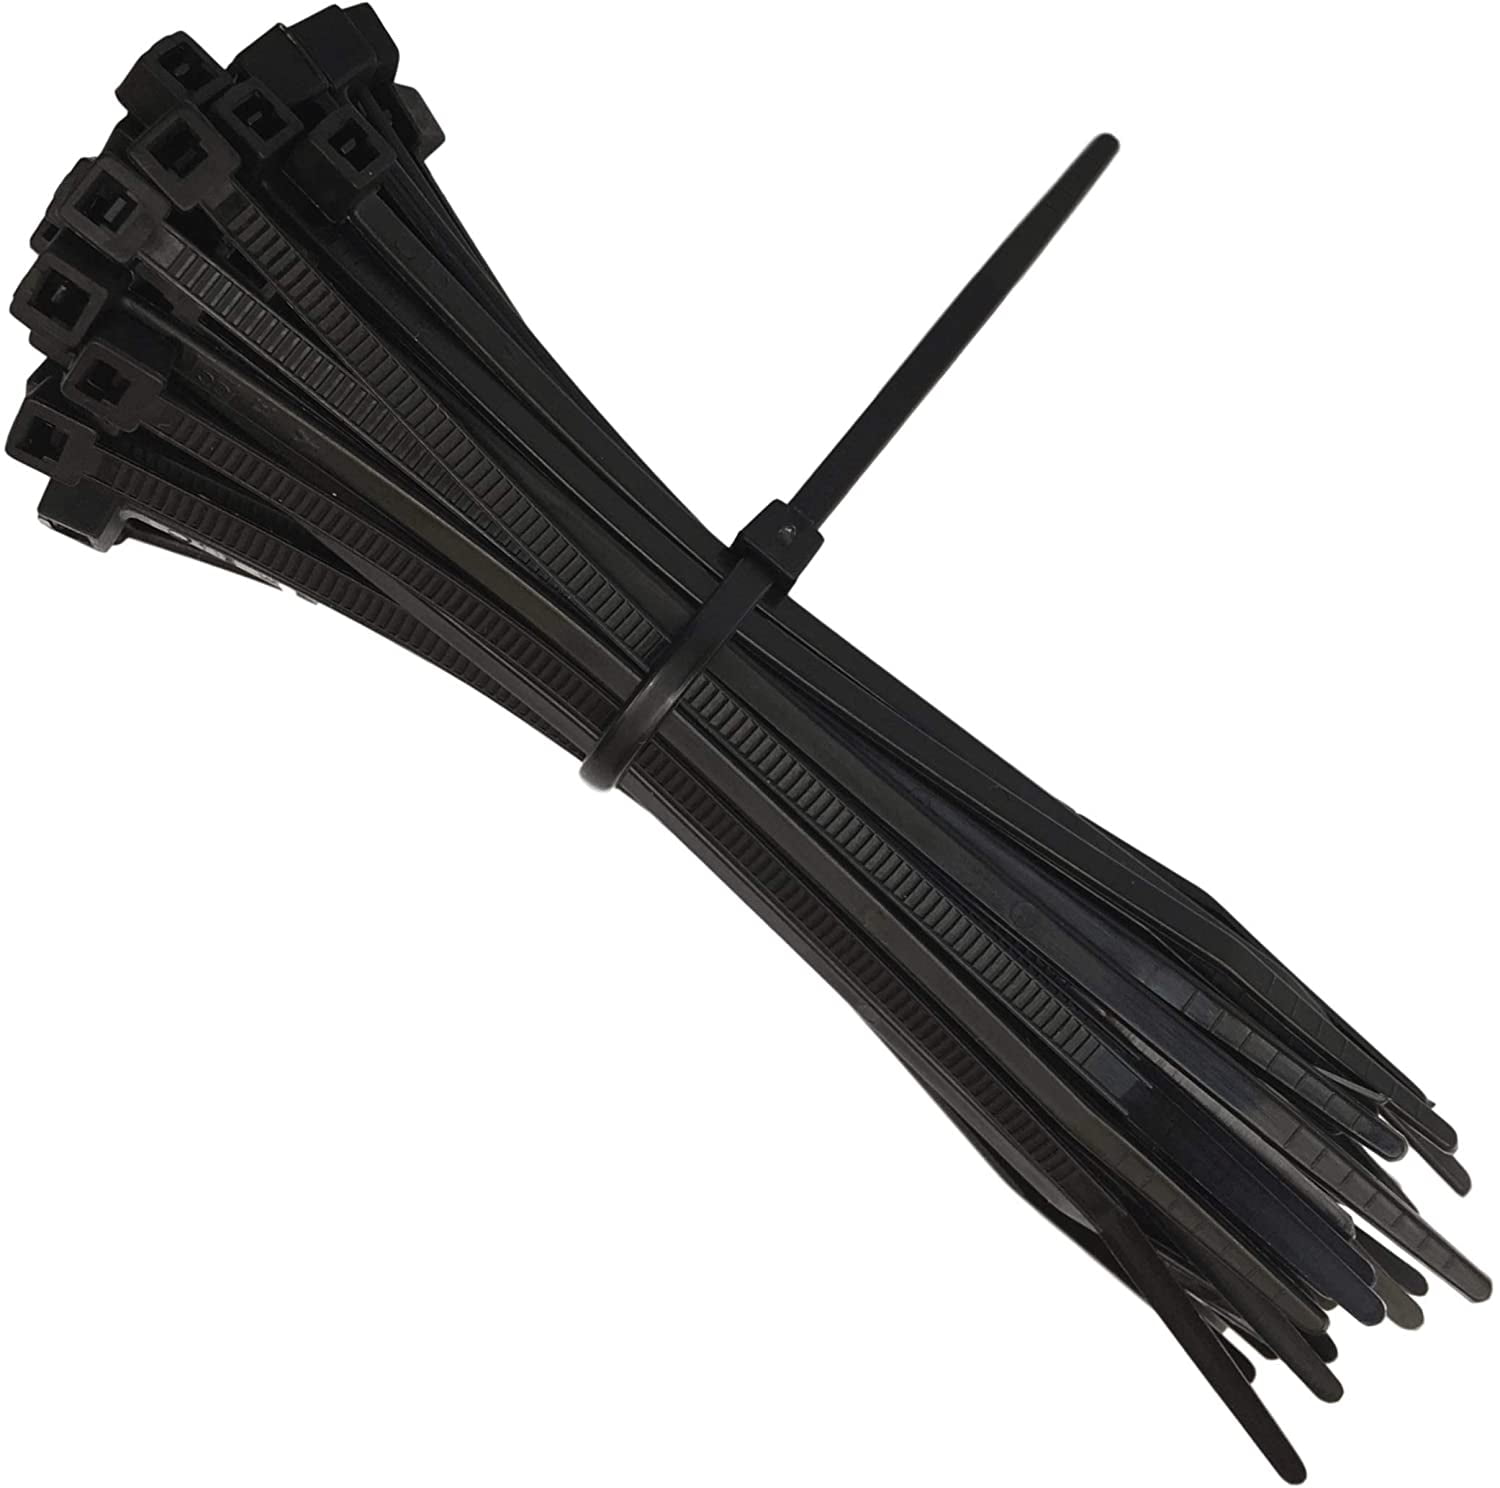 High Quality 100 Pack of Black Cable Ties 200mm x 2.5mm Premium Tie Wraps 